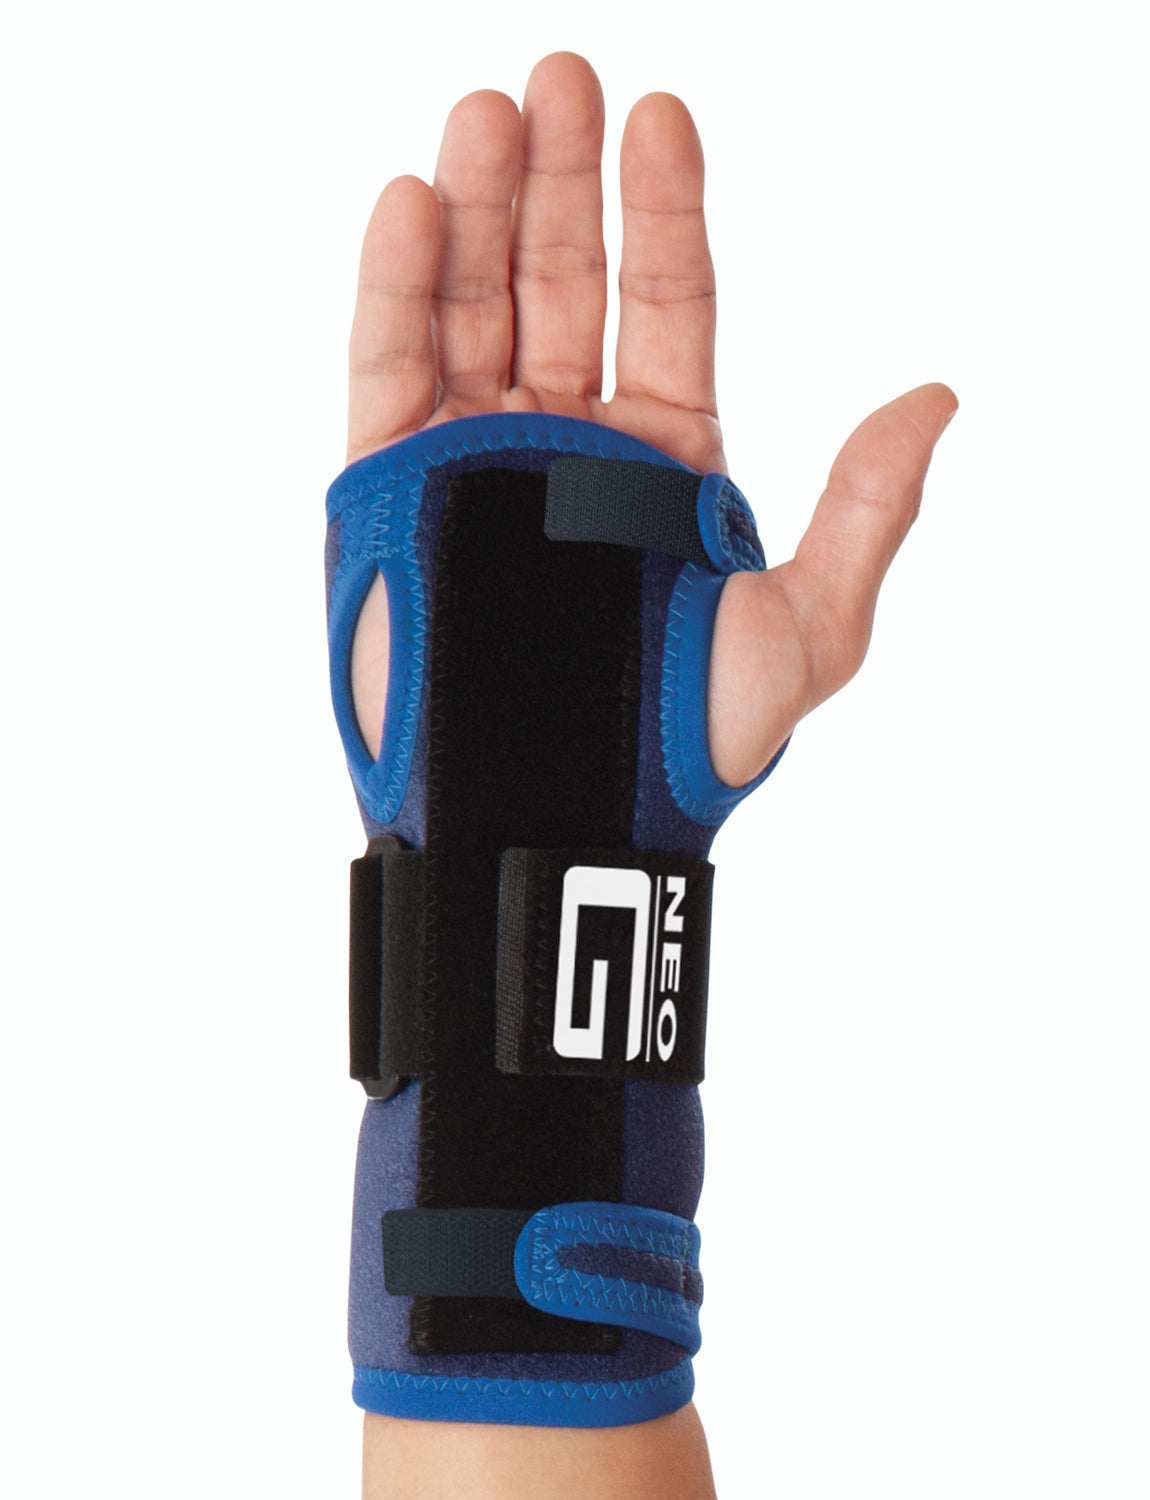  Neo G Wrist and Thumb Brace, Stabilized - Spica Support For  Carpal Tunnel Syndrome, Arthritis, Tendonitis, Joint Pain - Adjustable  Compression - Class 1 Medical Device - Left : Health & Household